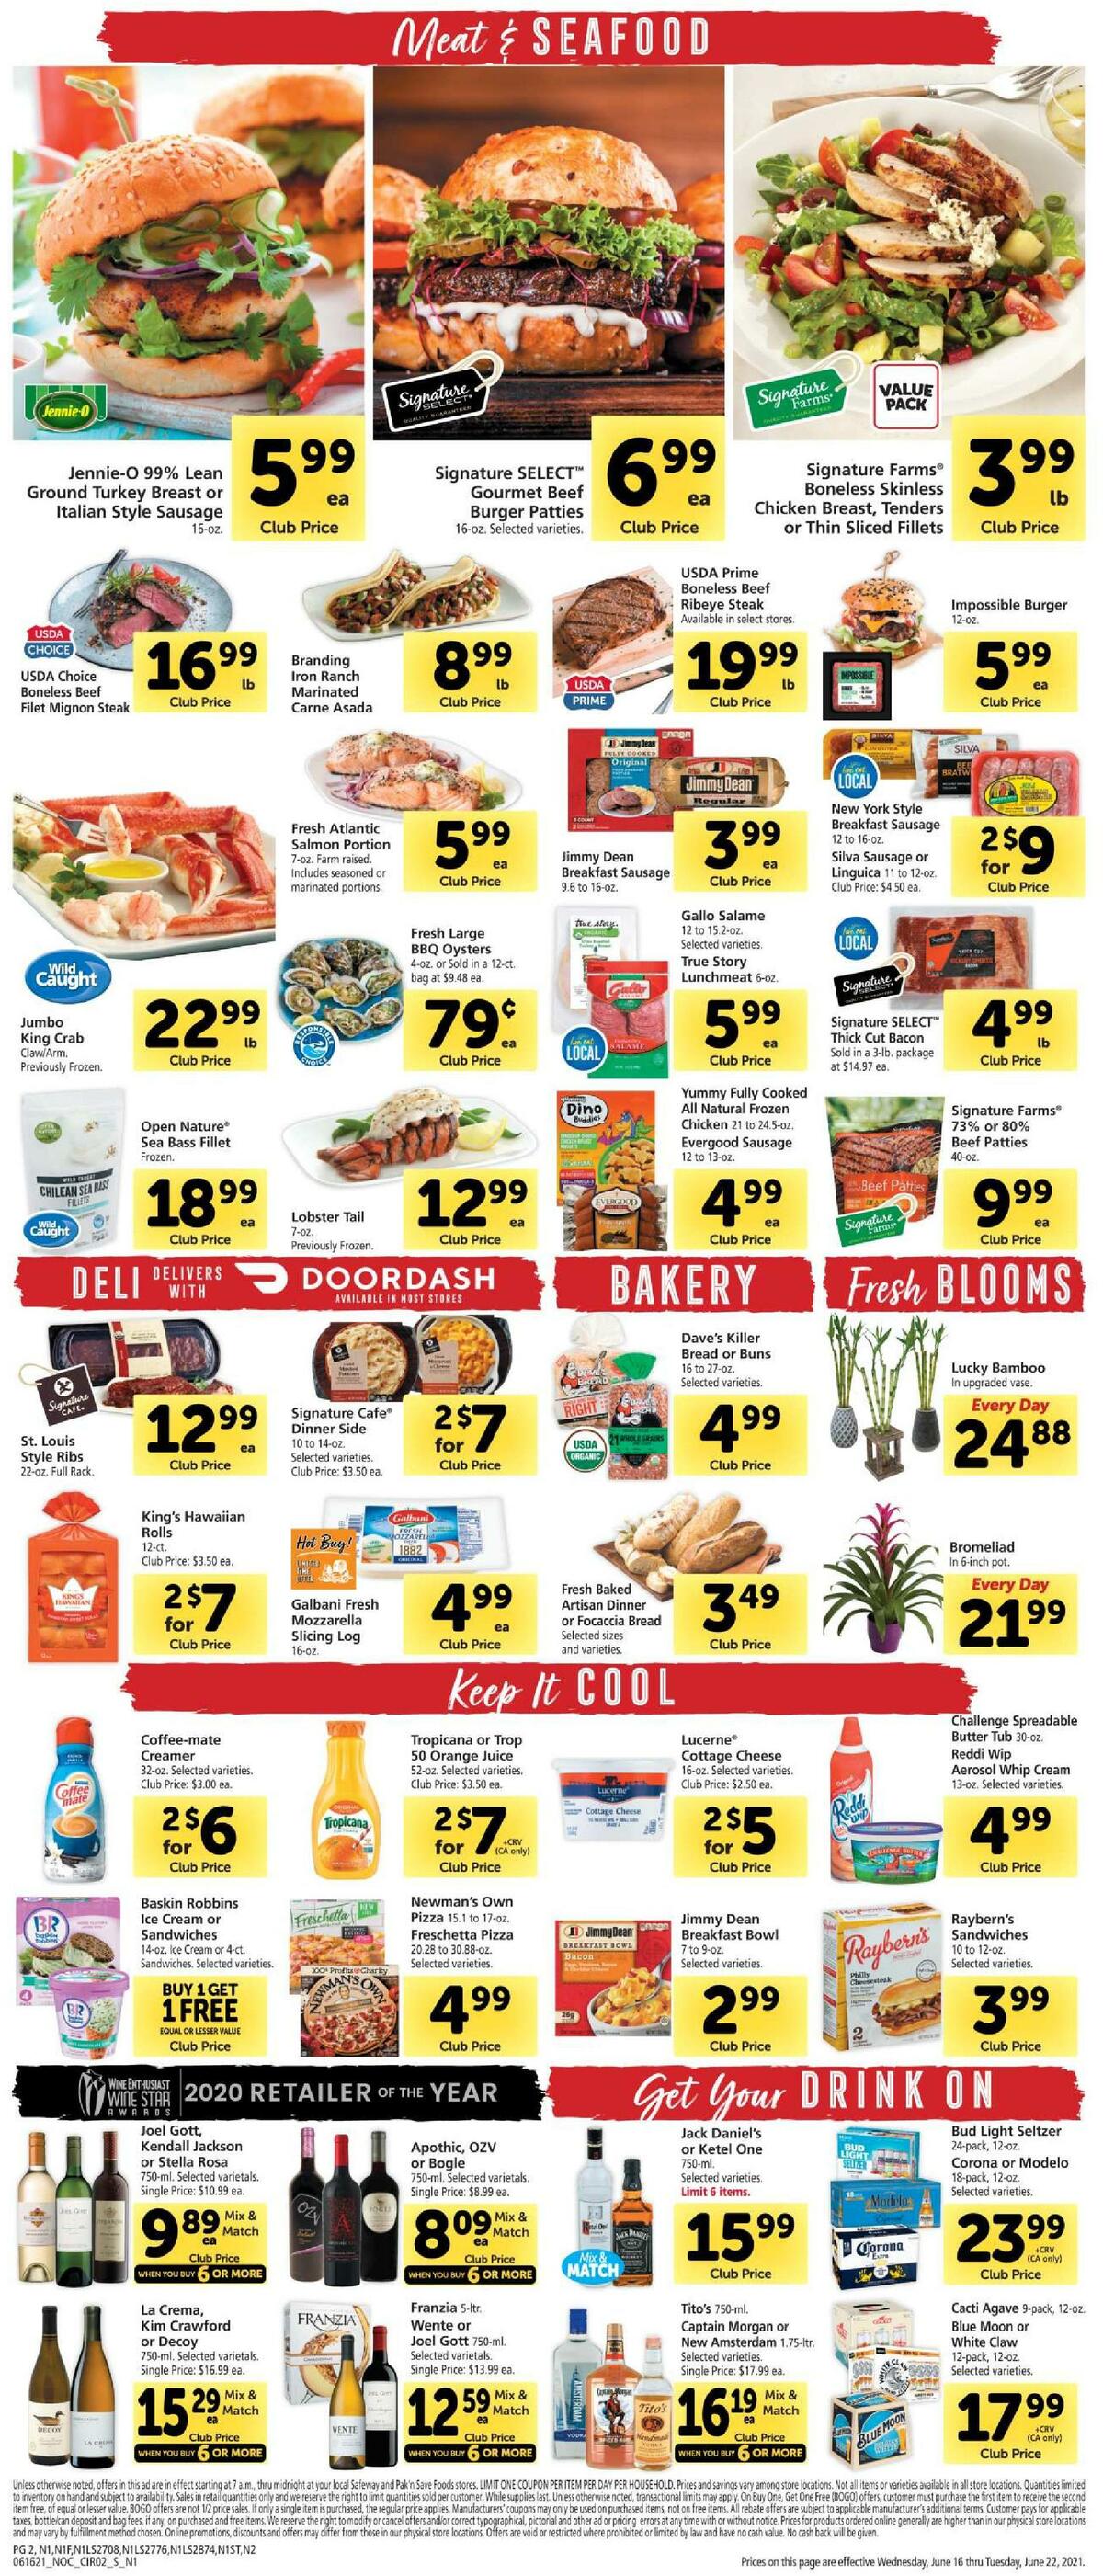 Safeway Weekly Ad from June 16